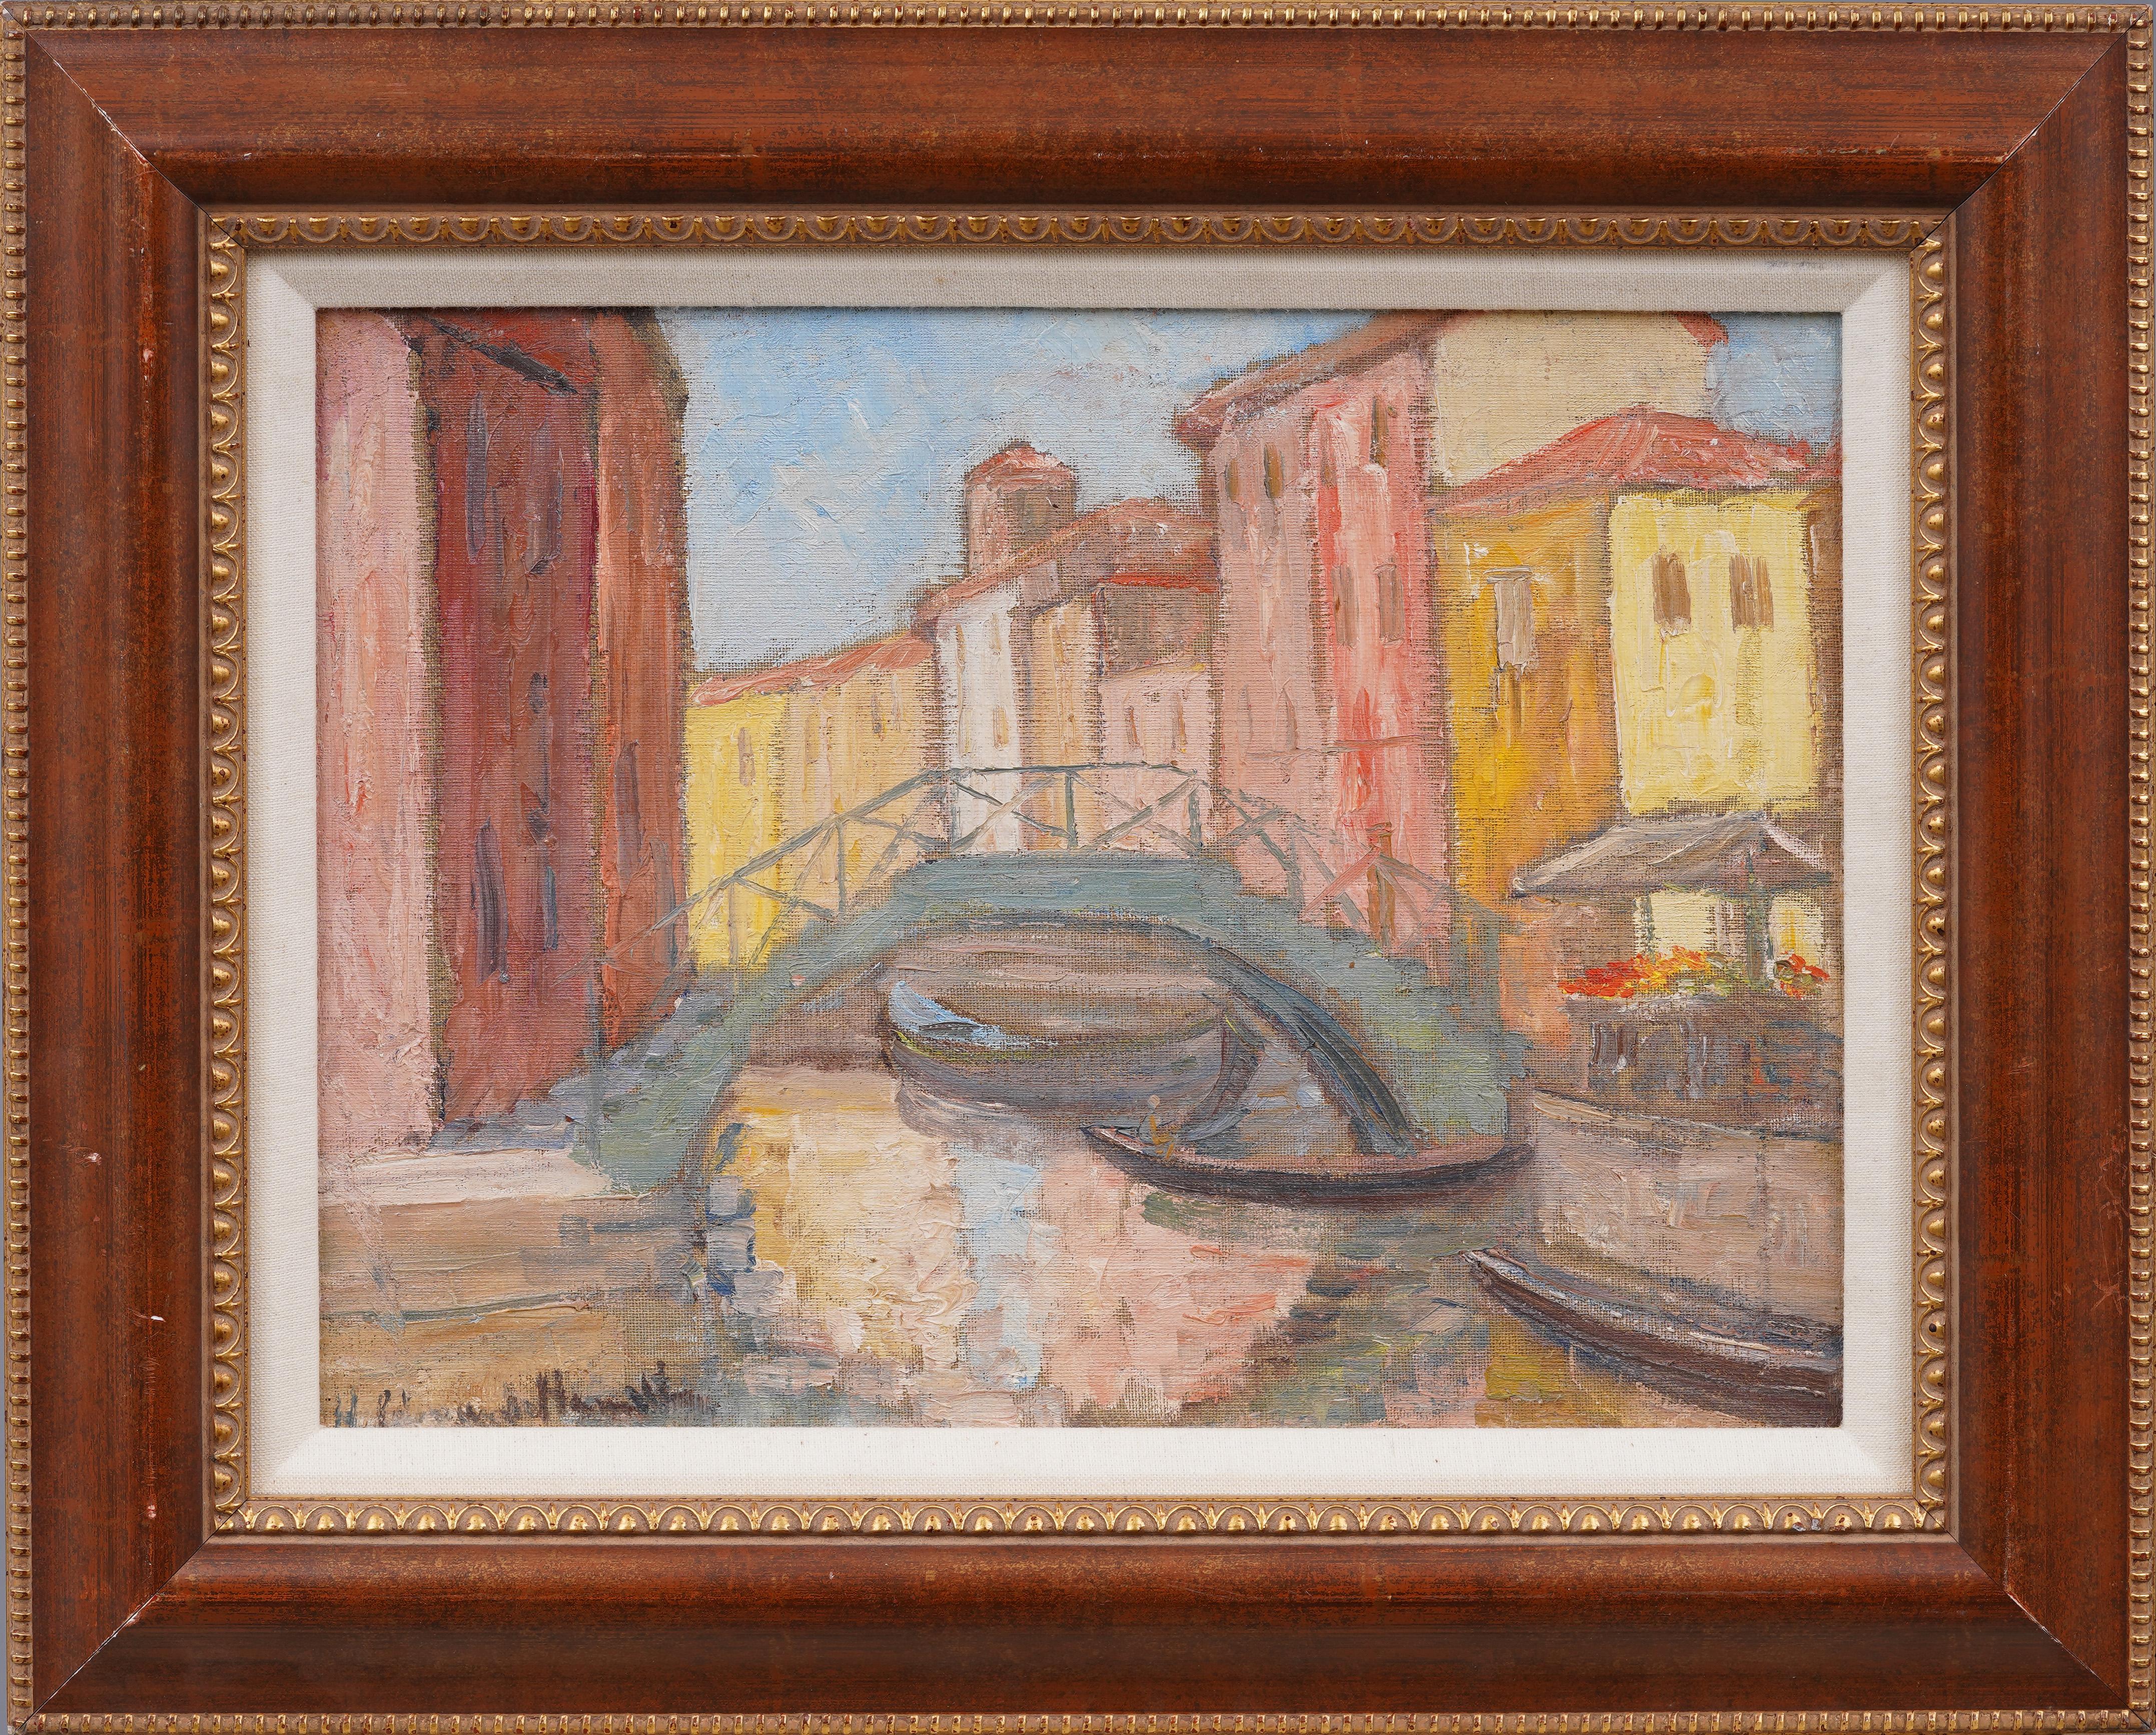 Hildegarde Hume Hamilton Landscape Painting - Burano Italy Antique Italian Impressionist Venice Canal Framed Oil Painting